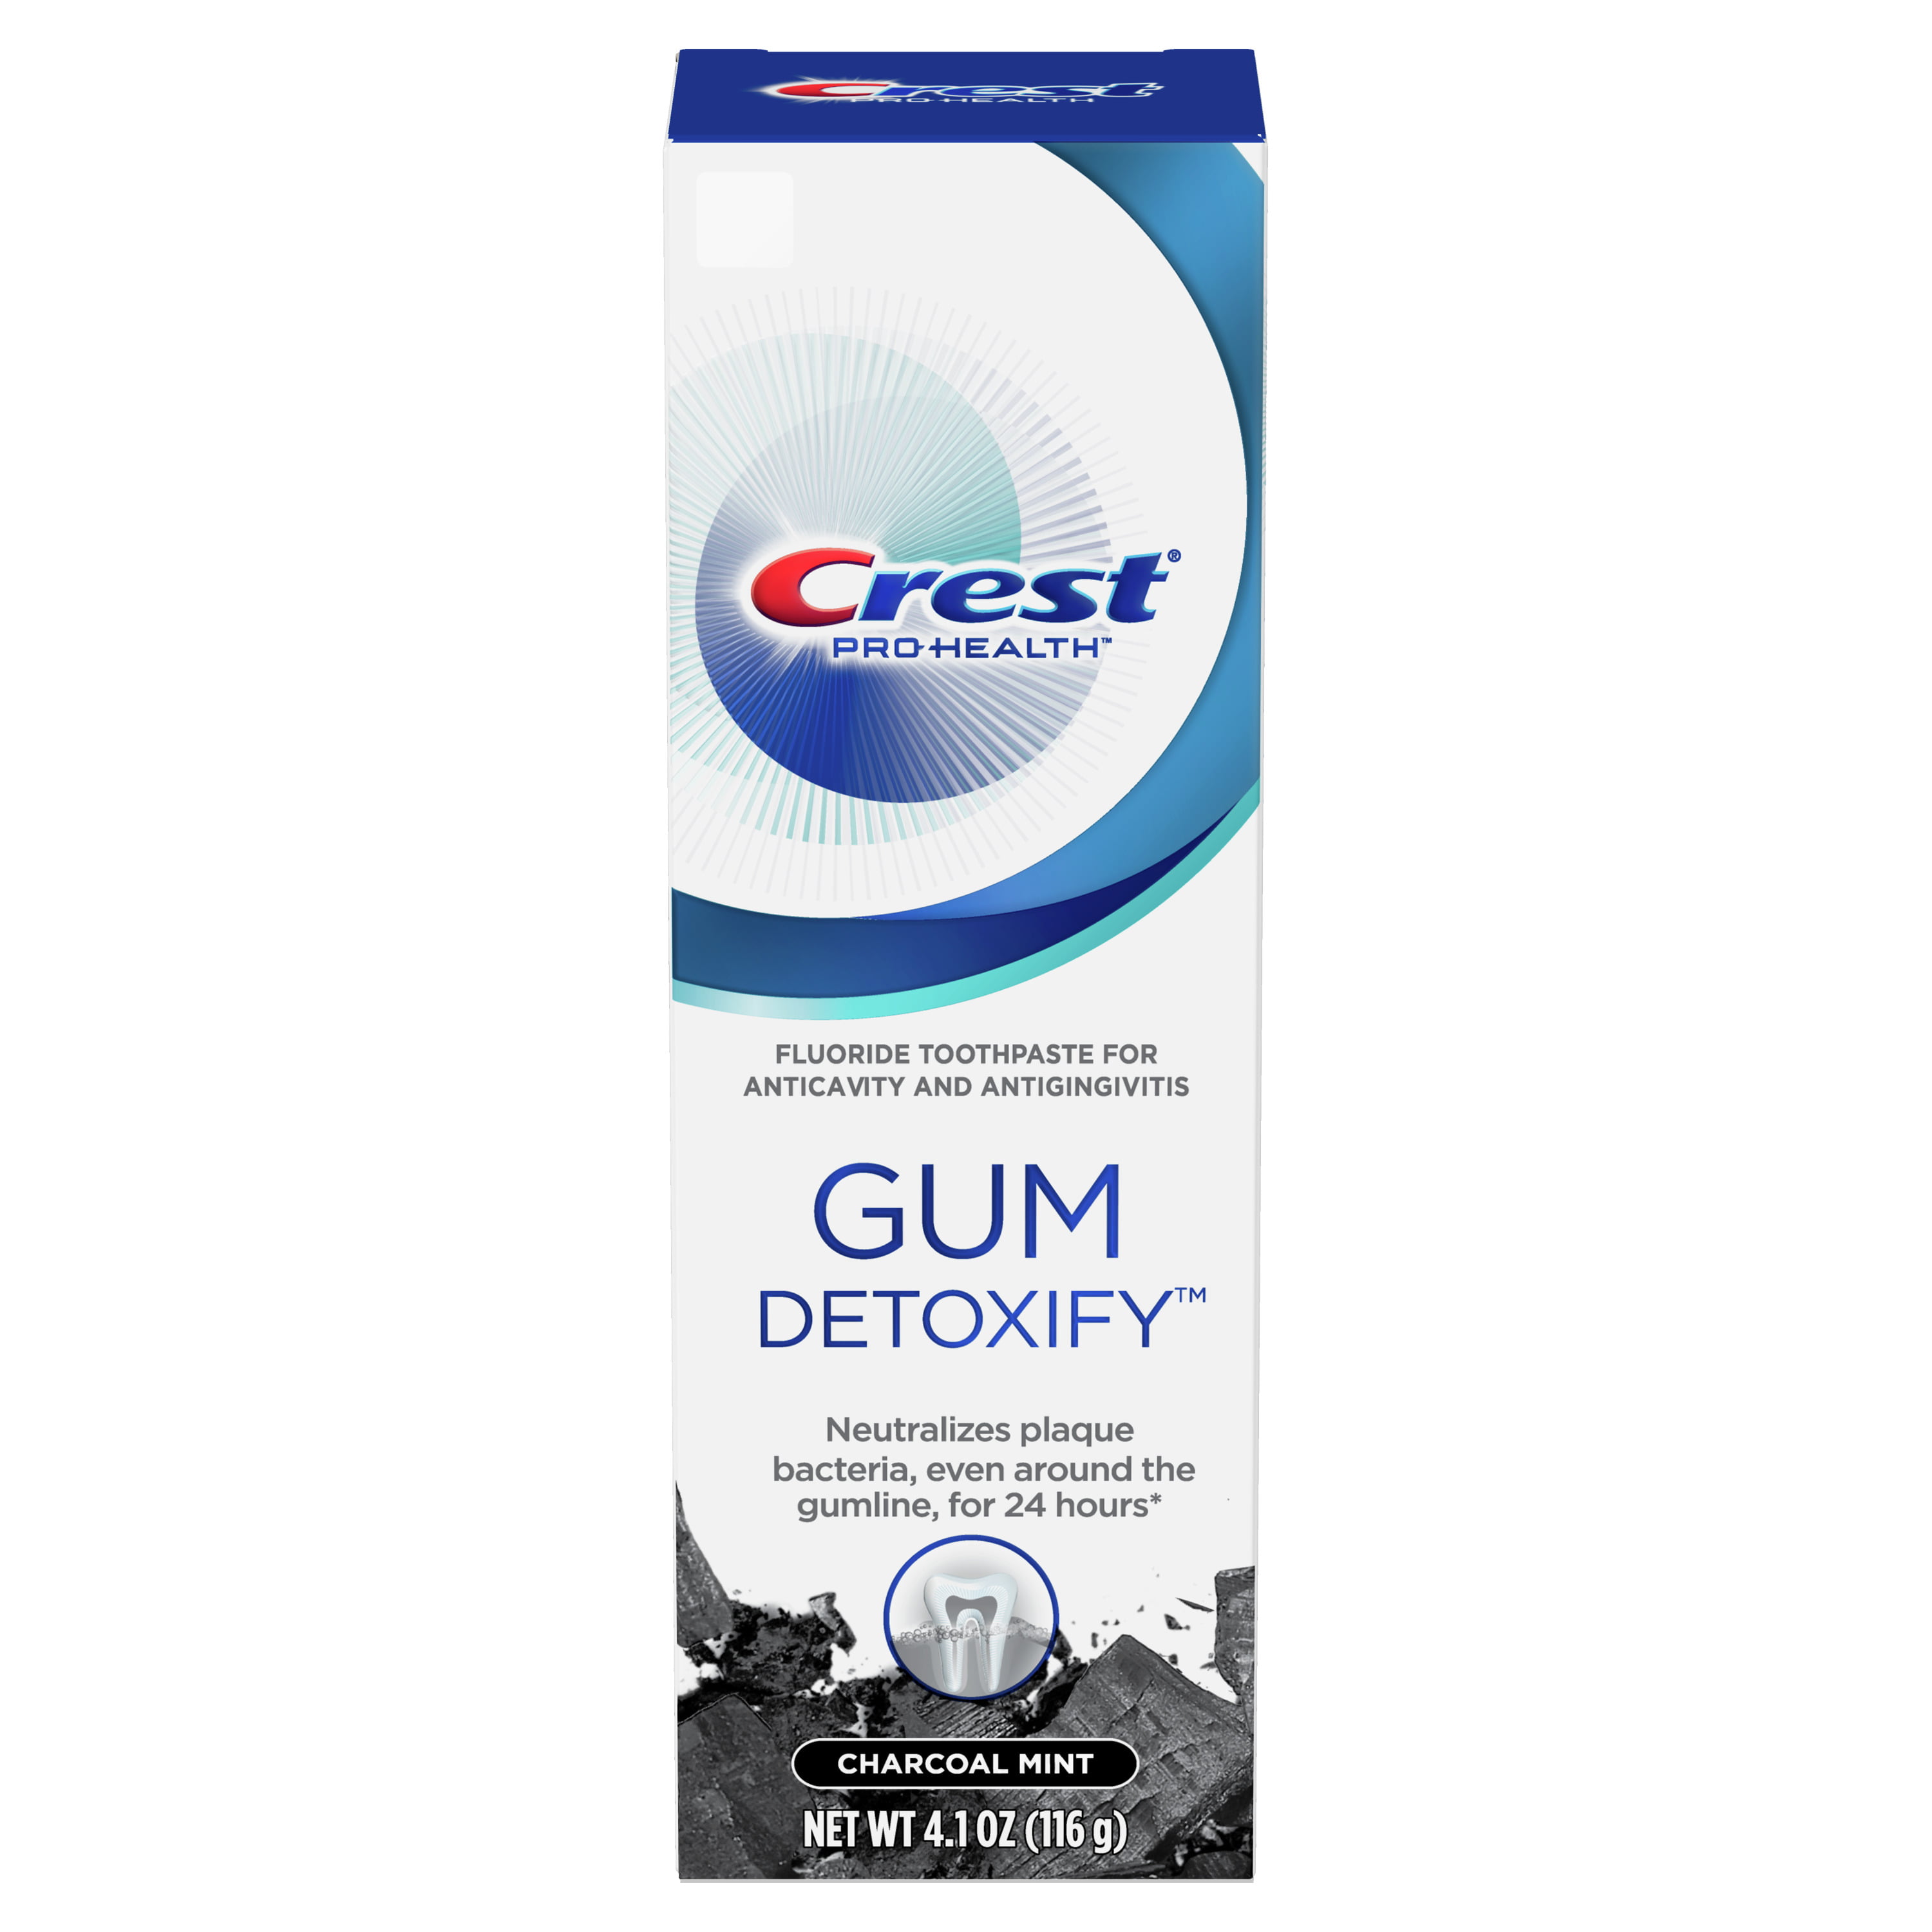 Difference Between Crest Pro Health And Crest Gum Detoxify